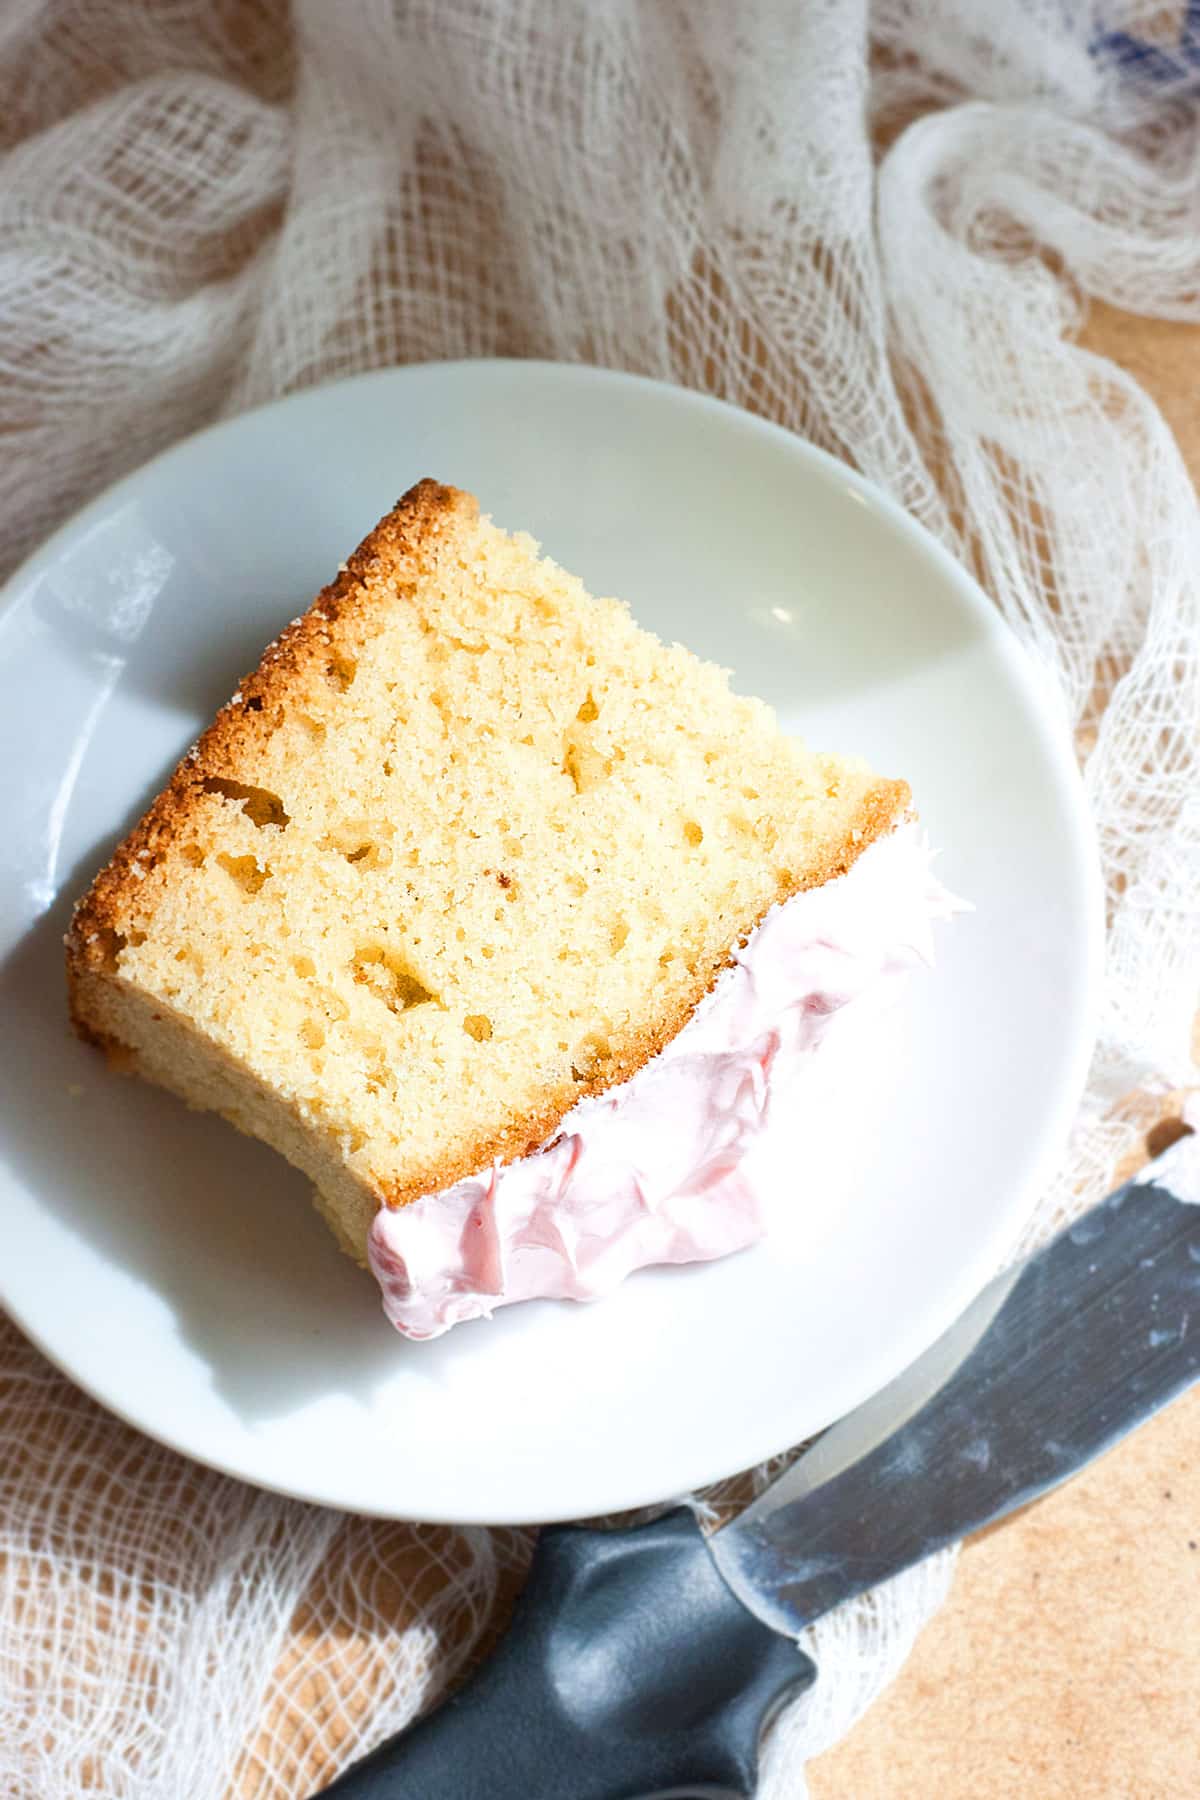 Slice of Pound Cake with Pink Frosting on White Plate.